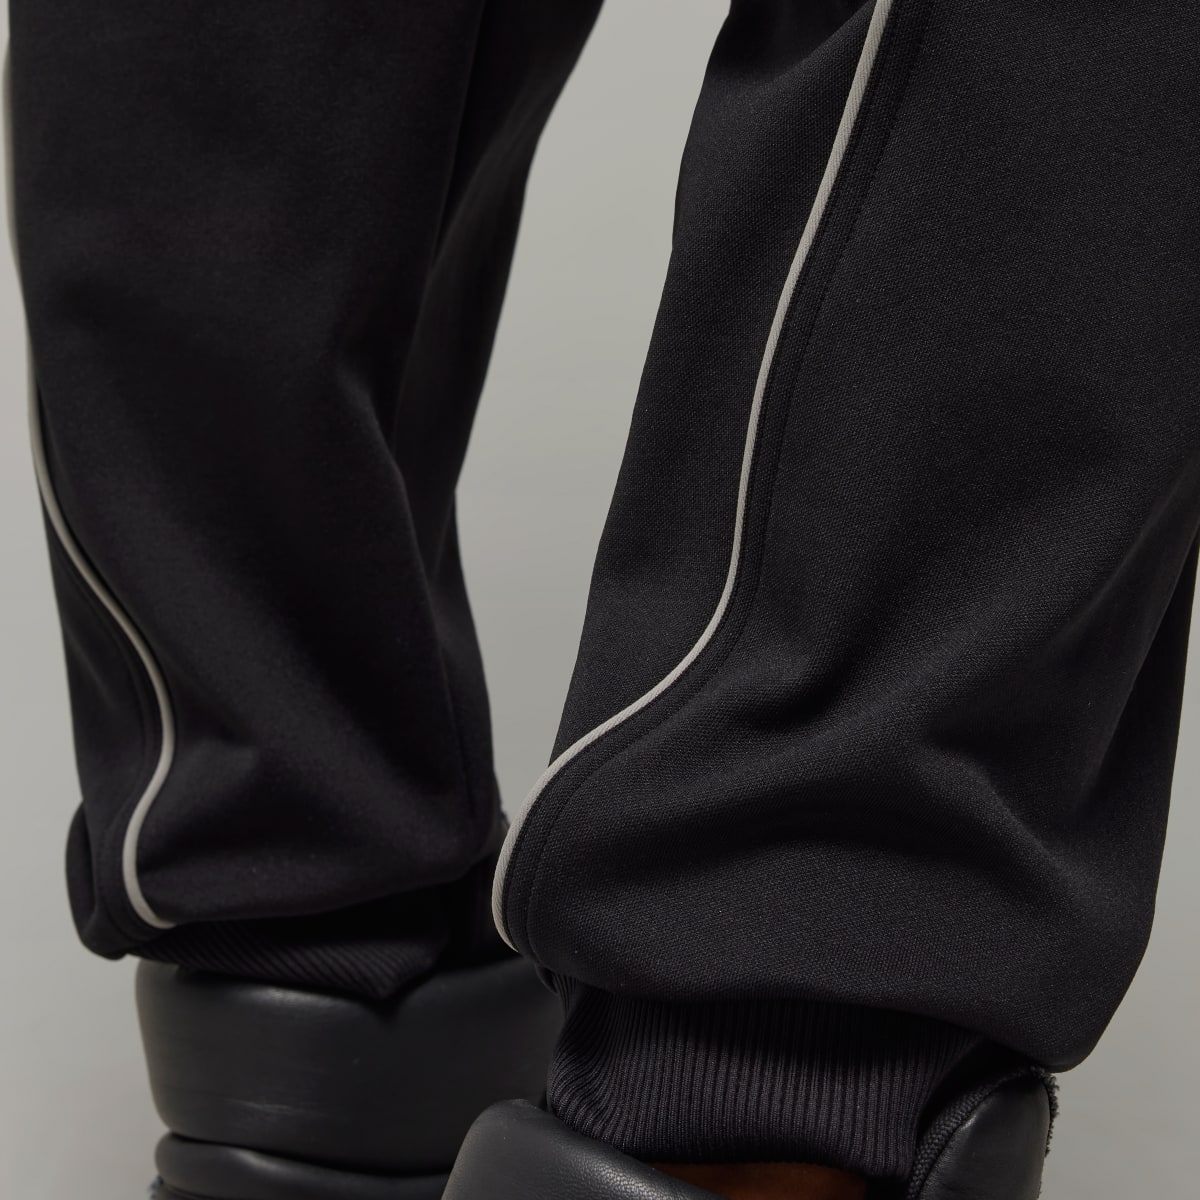 Adidas Y-3 SST Track Tracksuit Bottoms. 5